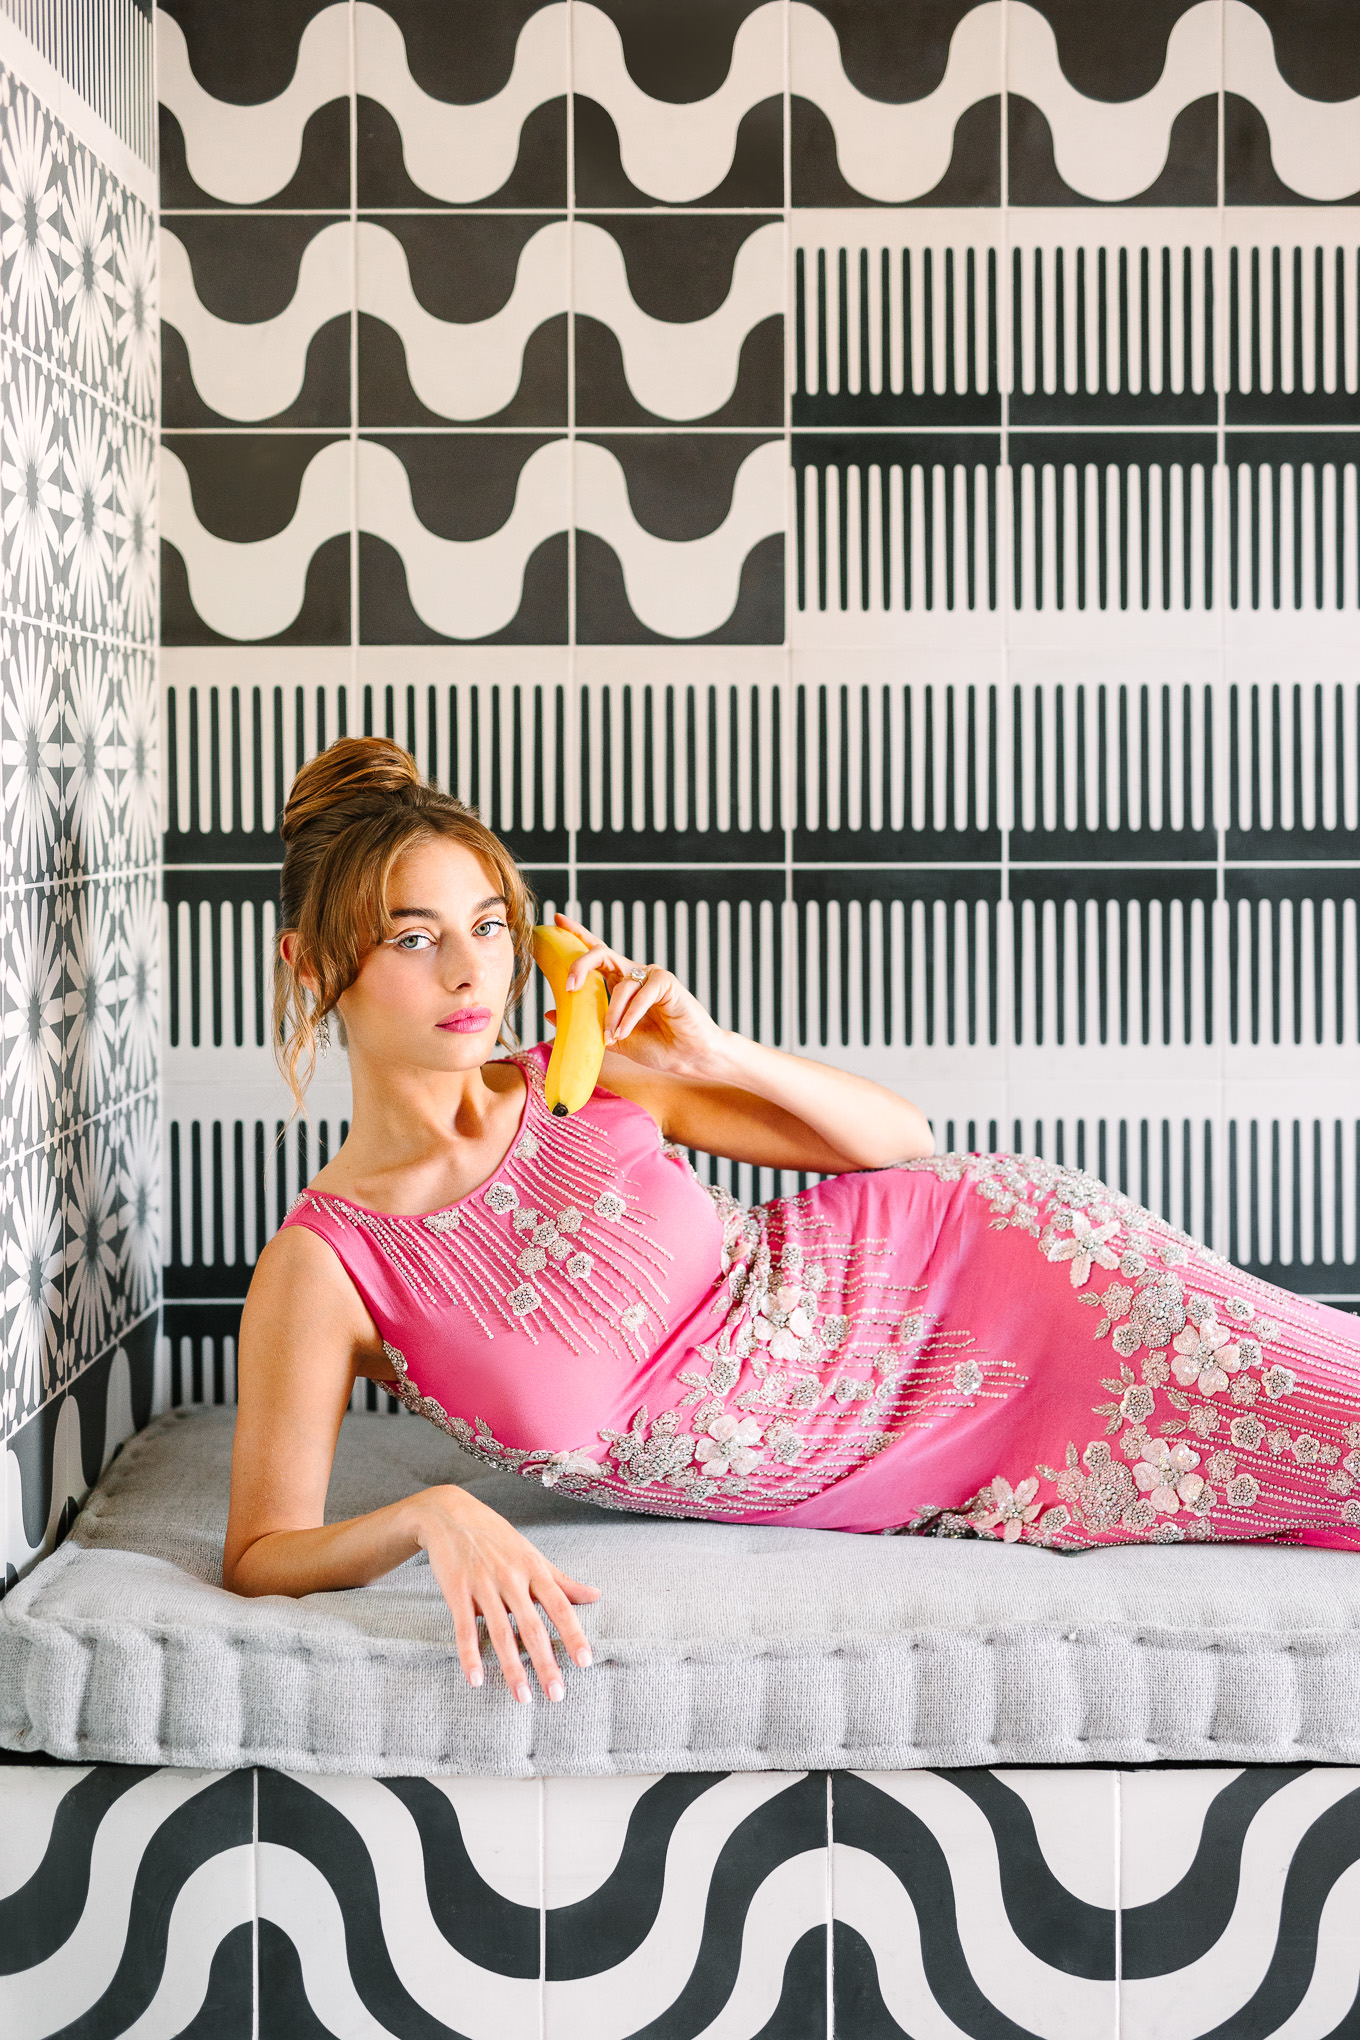 Beaded pink Naeem Khan gown in Sands Hotel tiled lobby with banana phone | Kindred Presets x Mary Costa Photography Sands Hotel Ad Campaign | Colorful Palm Springs wedding photography | #palmspringsphotographer #lightroompresets #sandshotel #pinkhotel   Source: Mary Costa Photography | Los Angeles